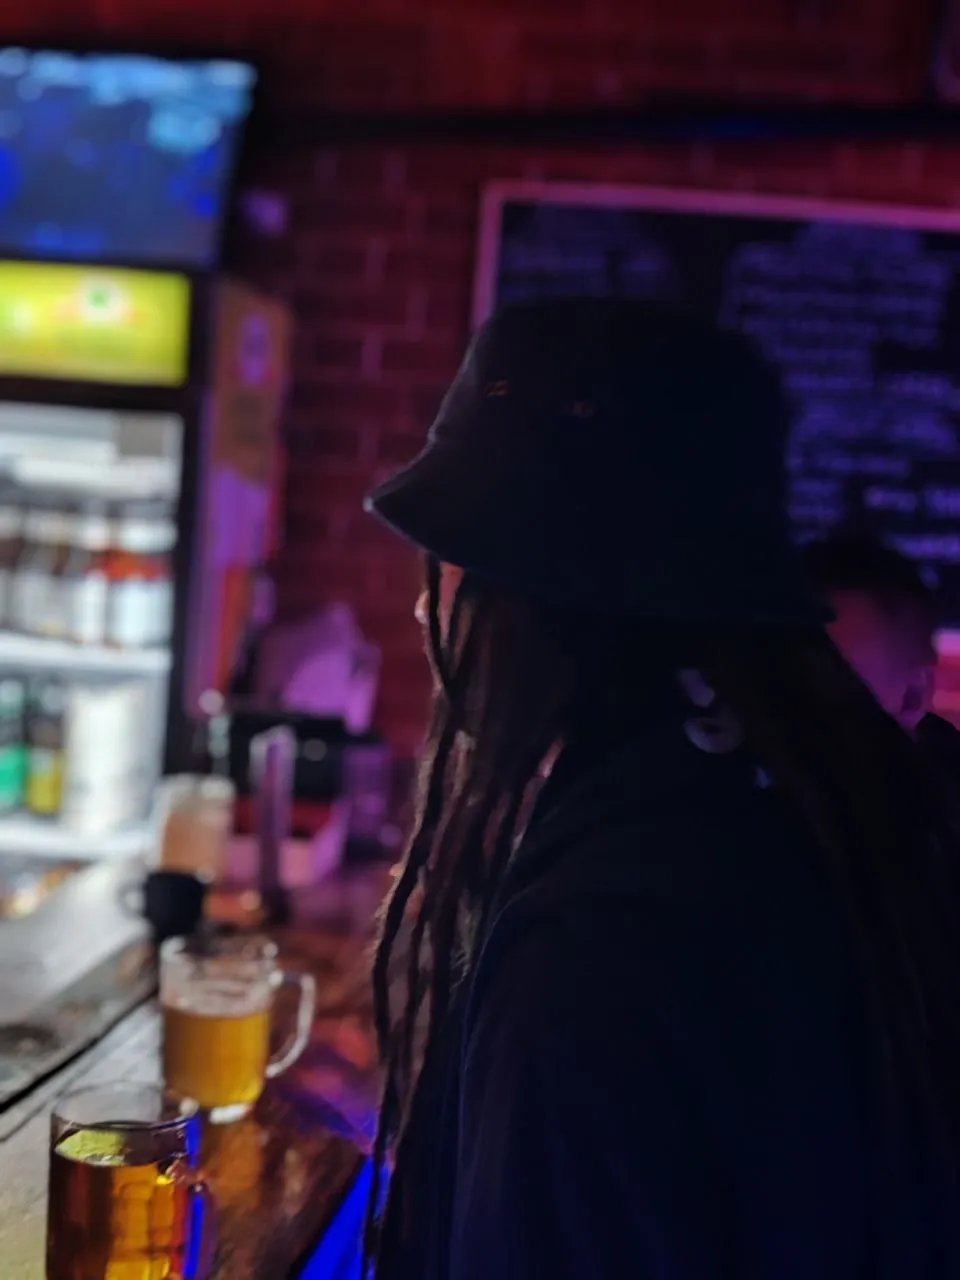 A man with dreadlocks sitting in an urban jazz club, the warm light of the stage illuminating his face and hair